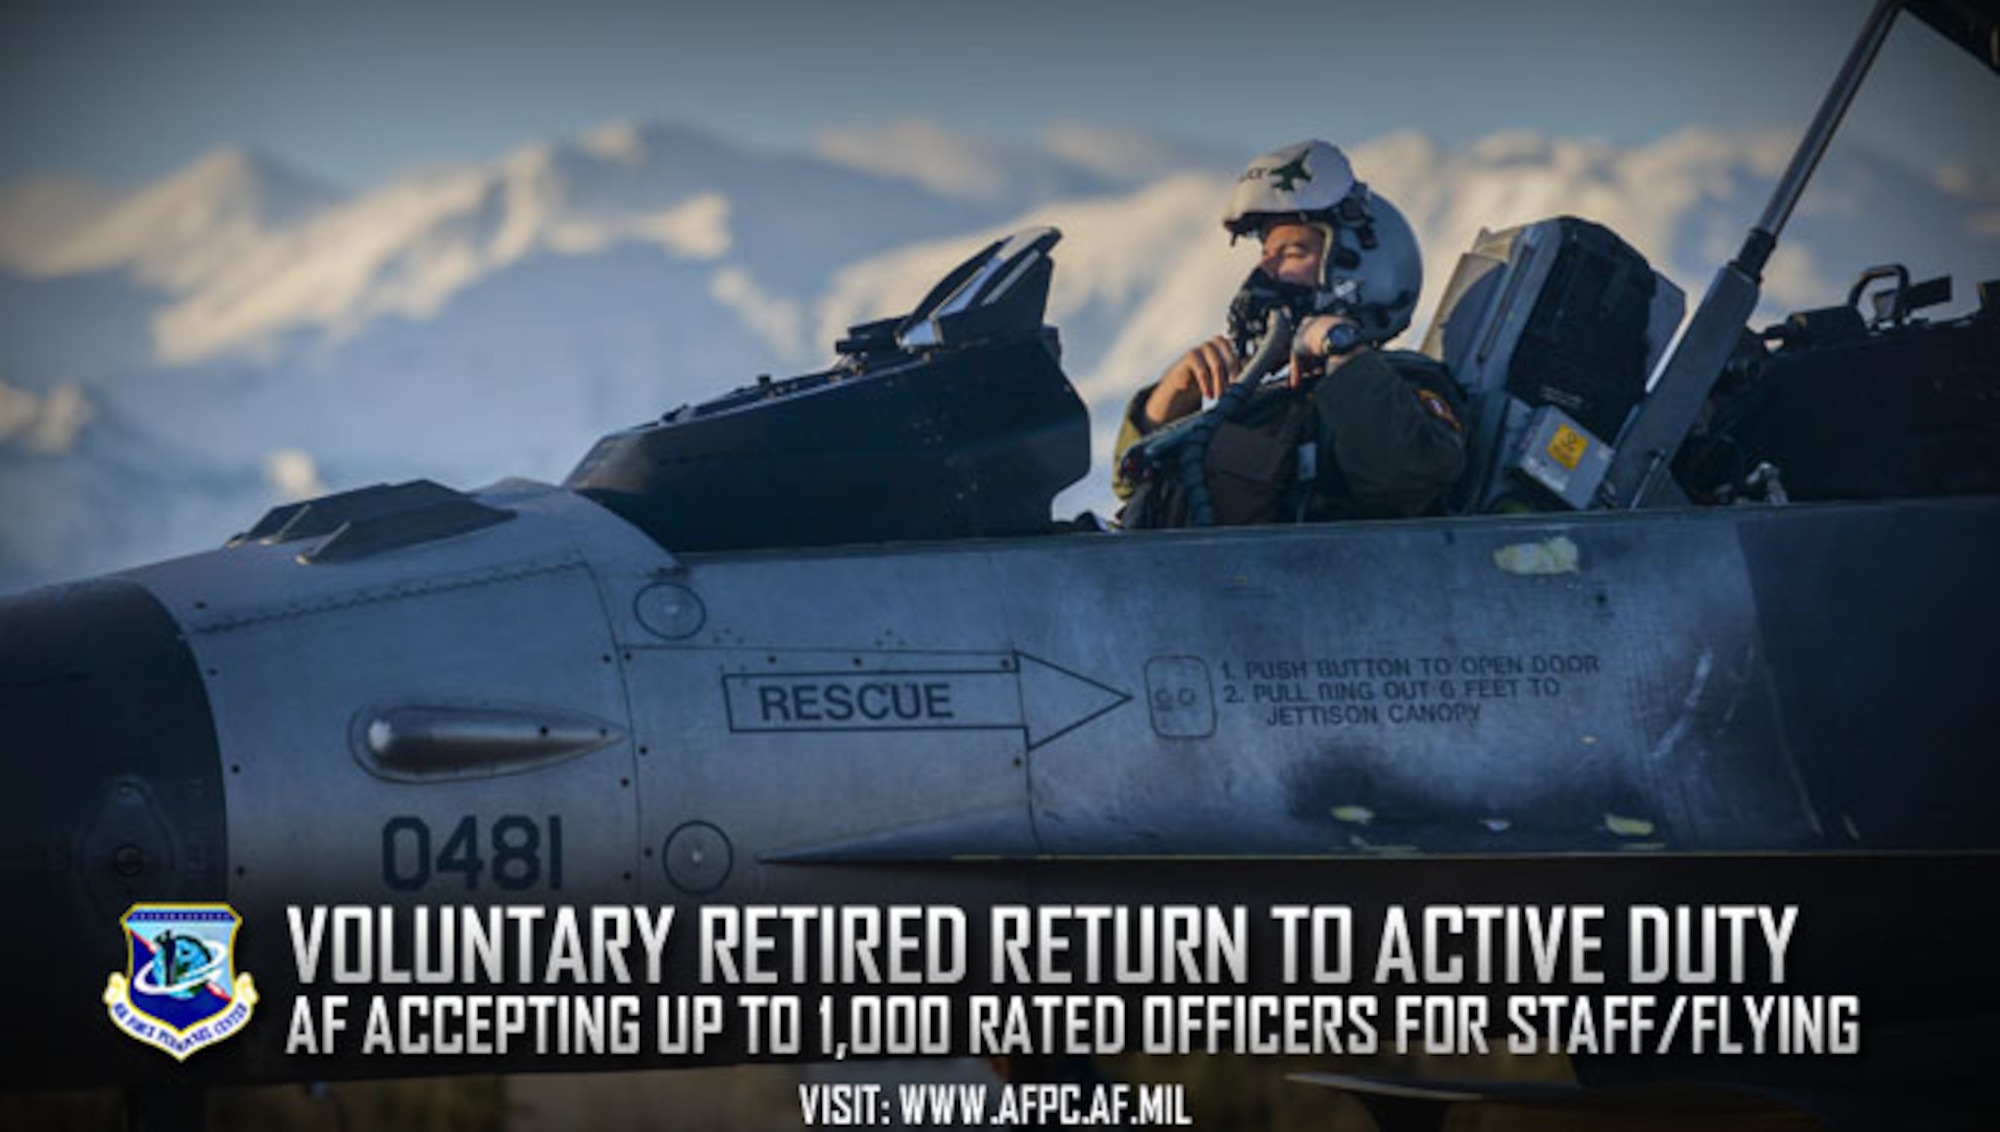 Voluntary Retired Return to Active Duty; AF accepting up to 1,000 rated officers for staff/flying